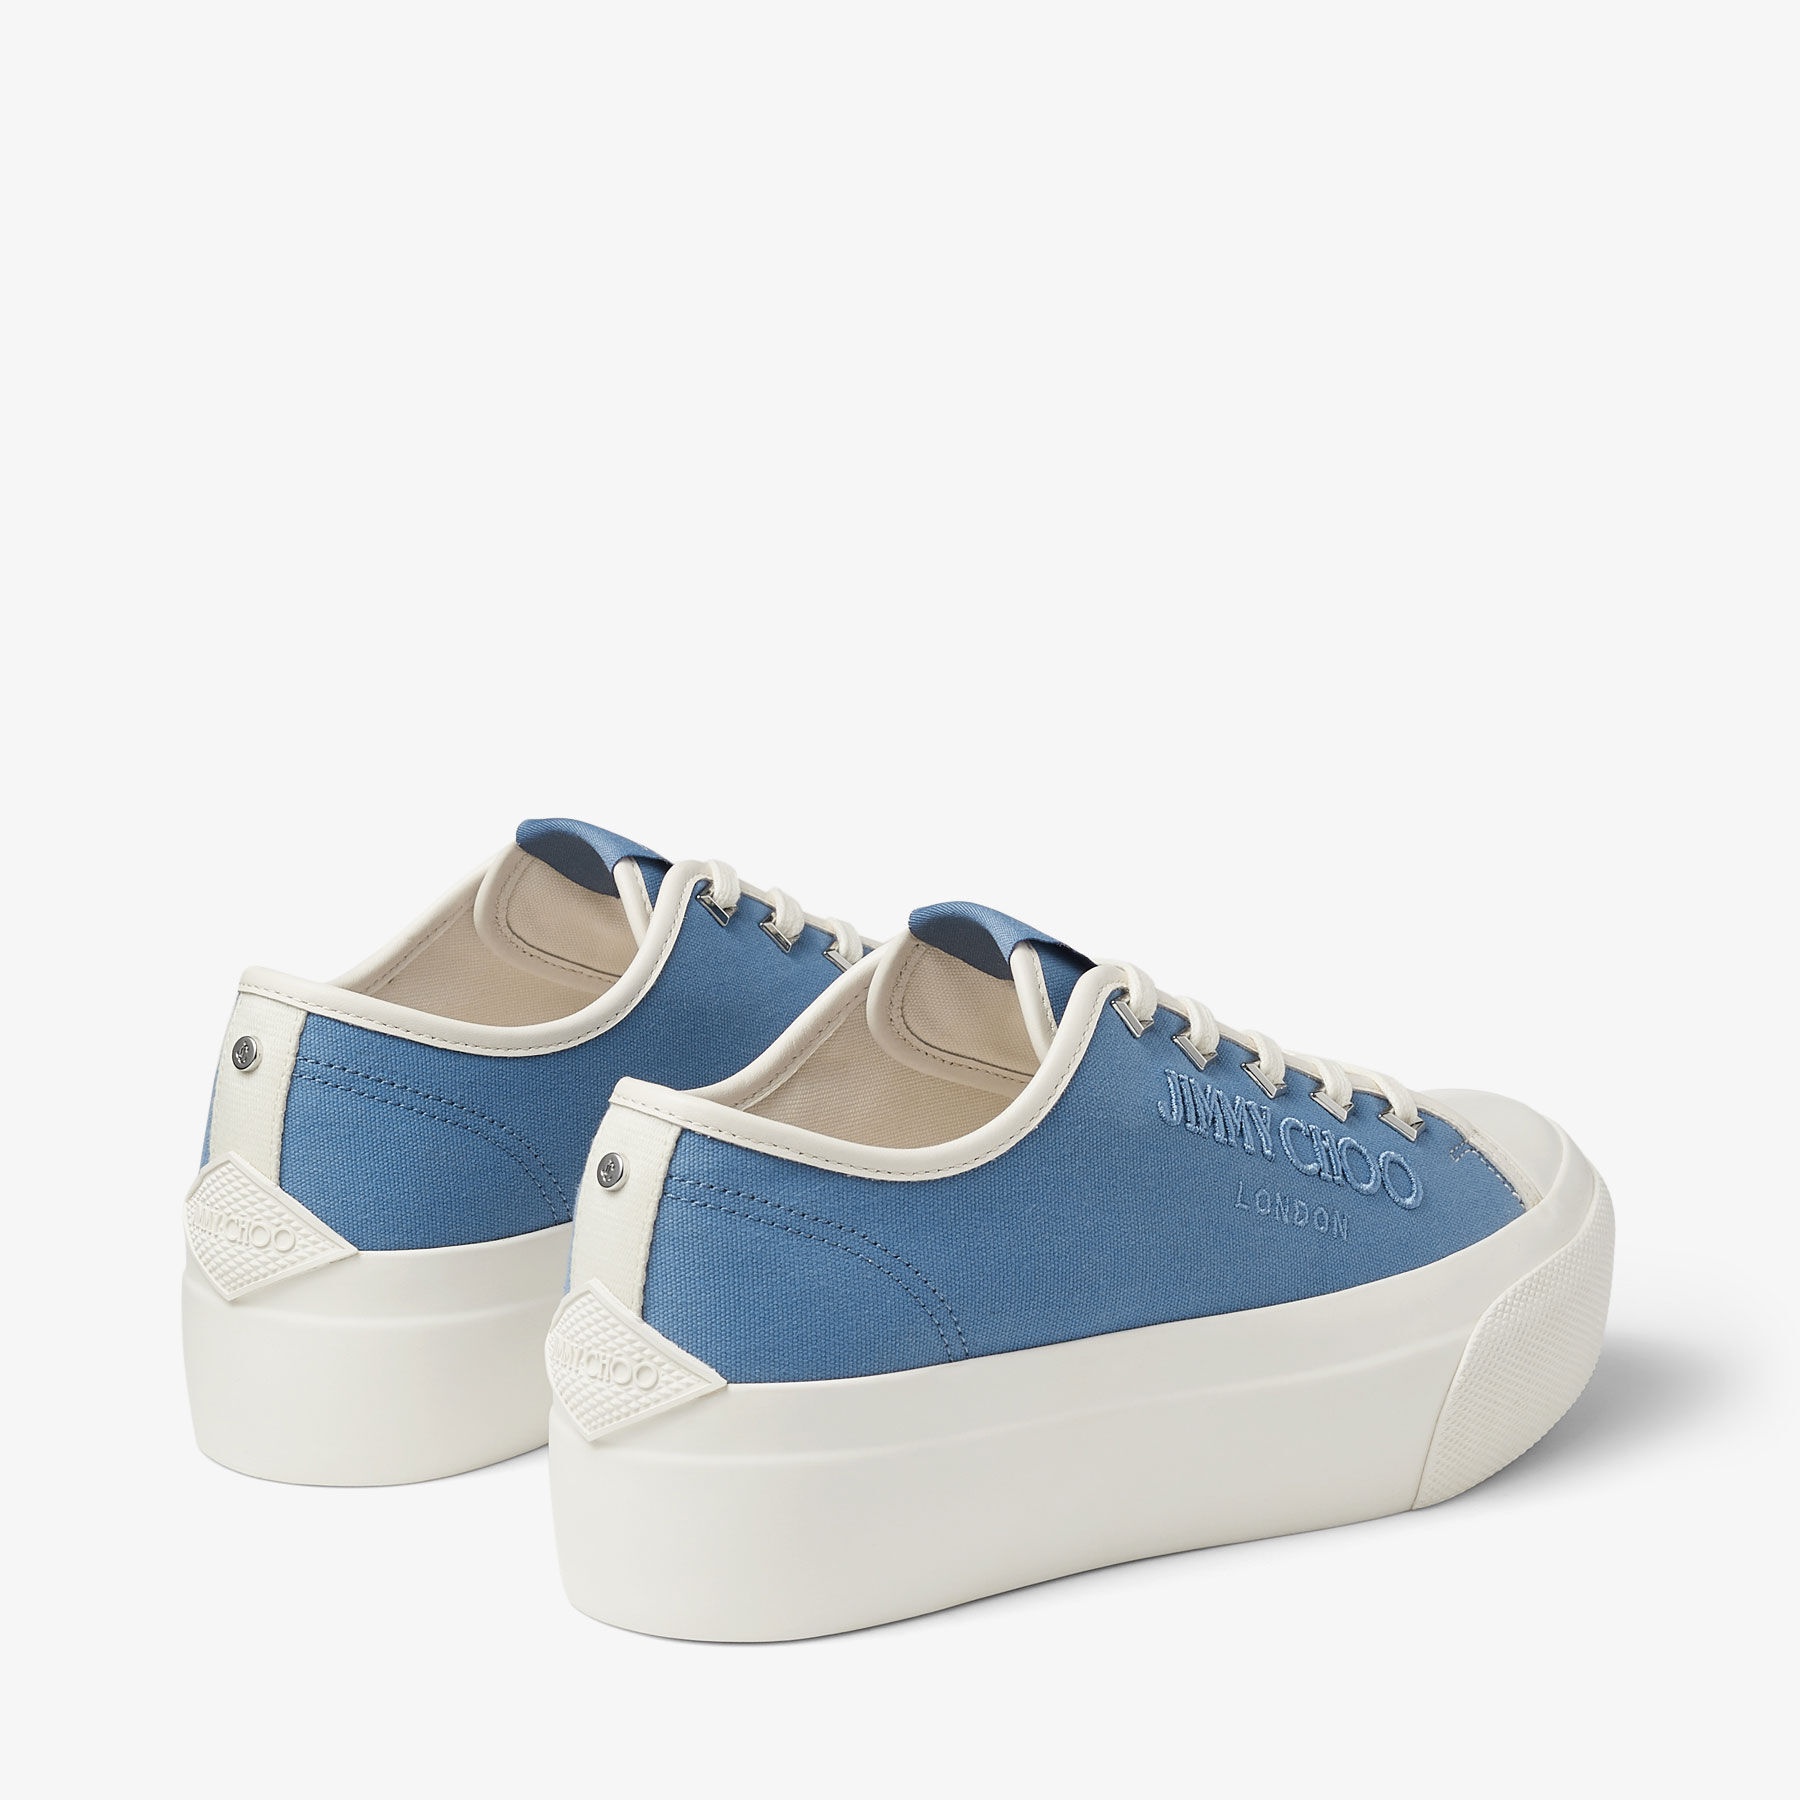 Palma Maxi/F
Denim and Latte Canvas Platform Trainers with Embroidered Logo - 6